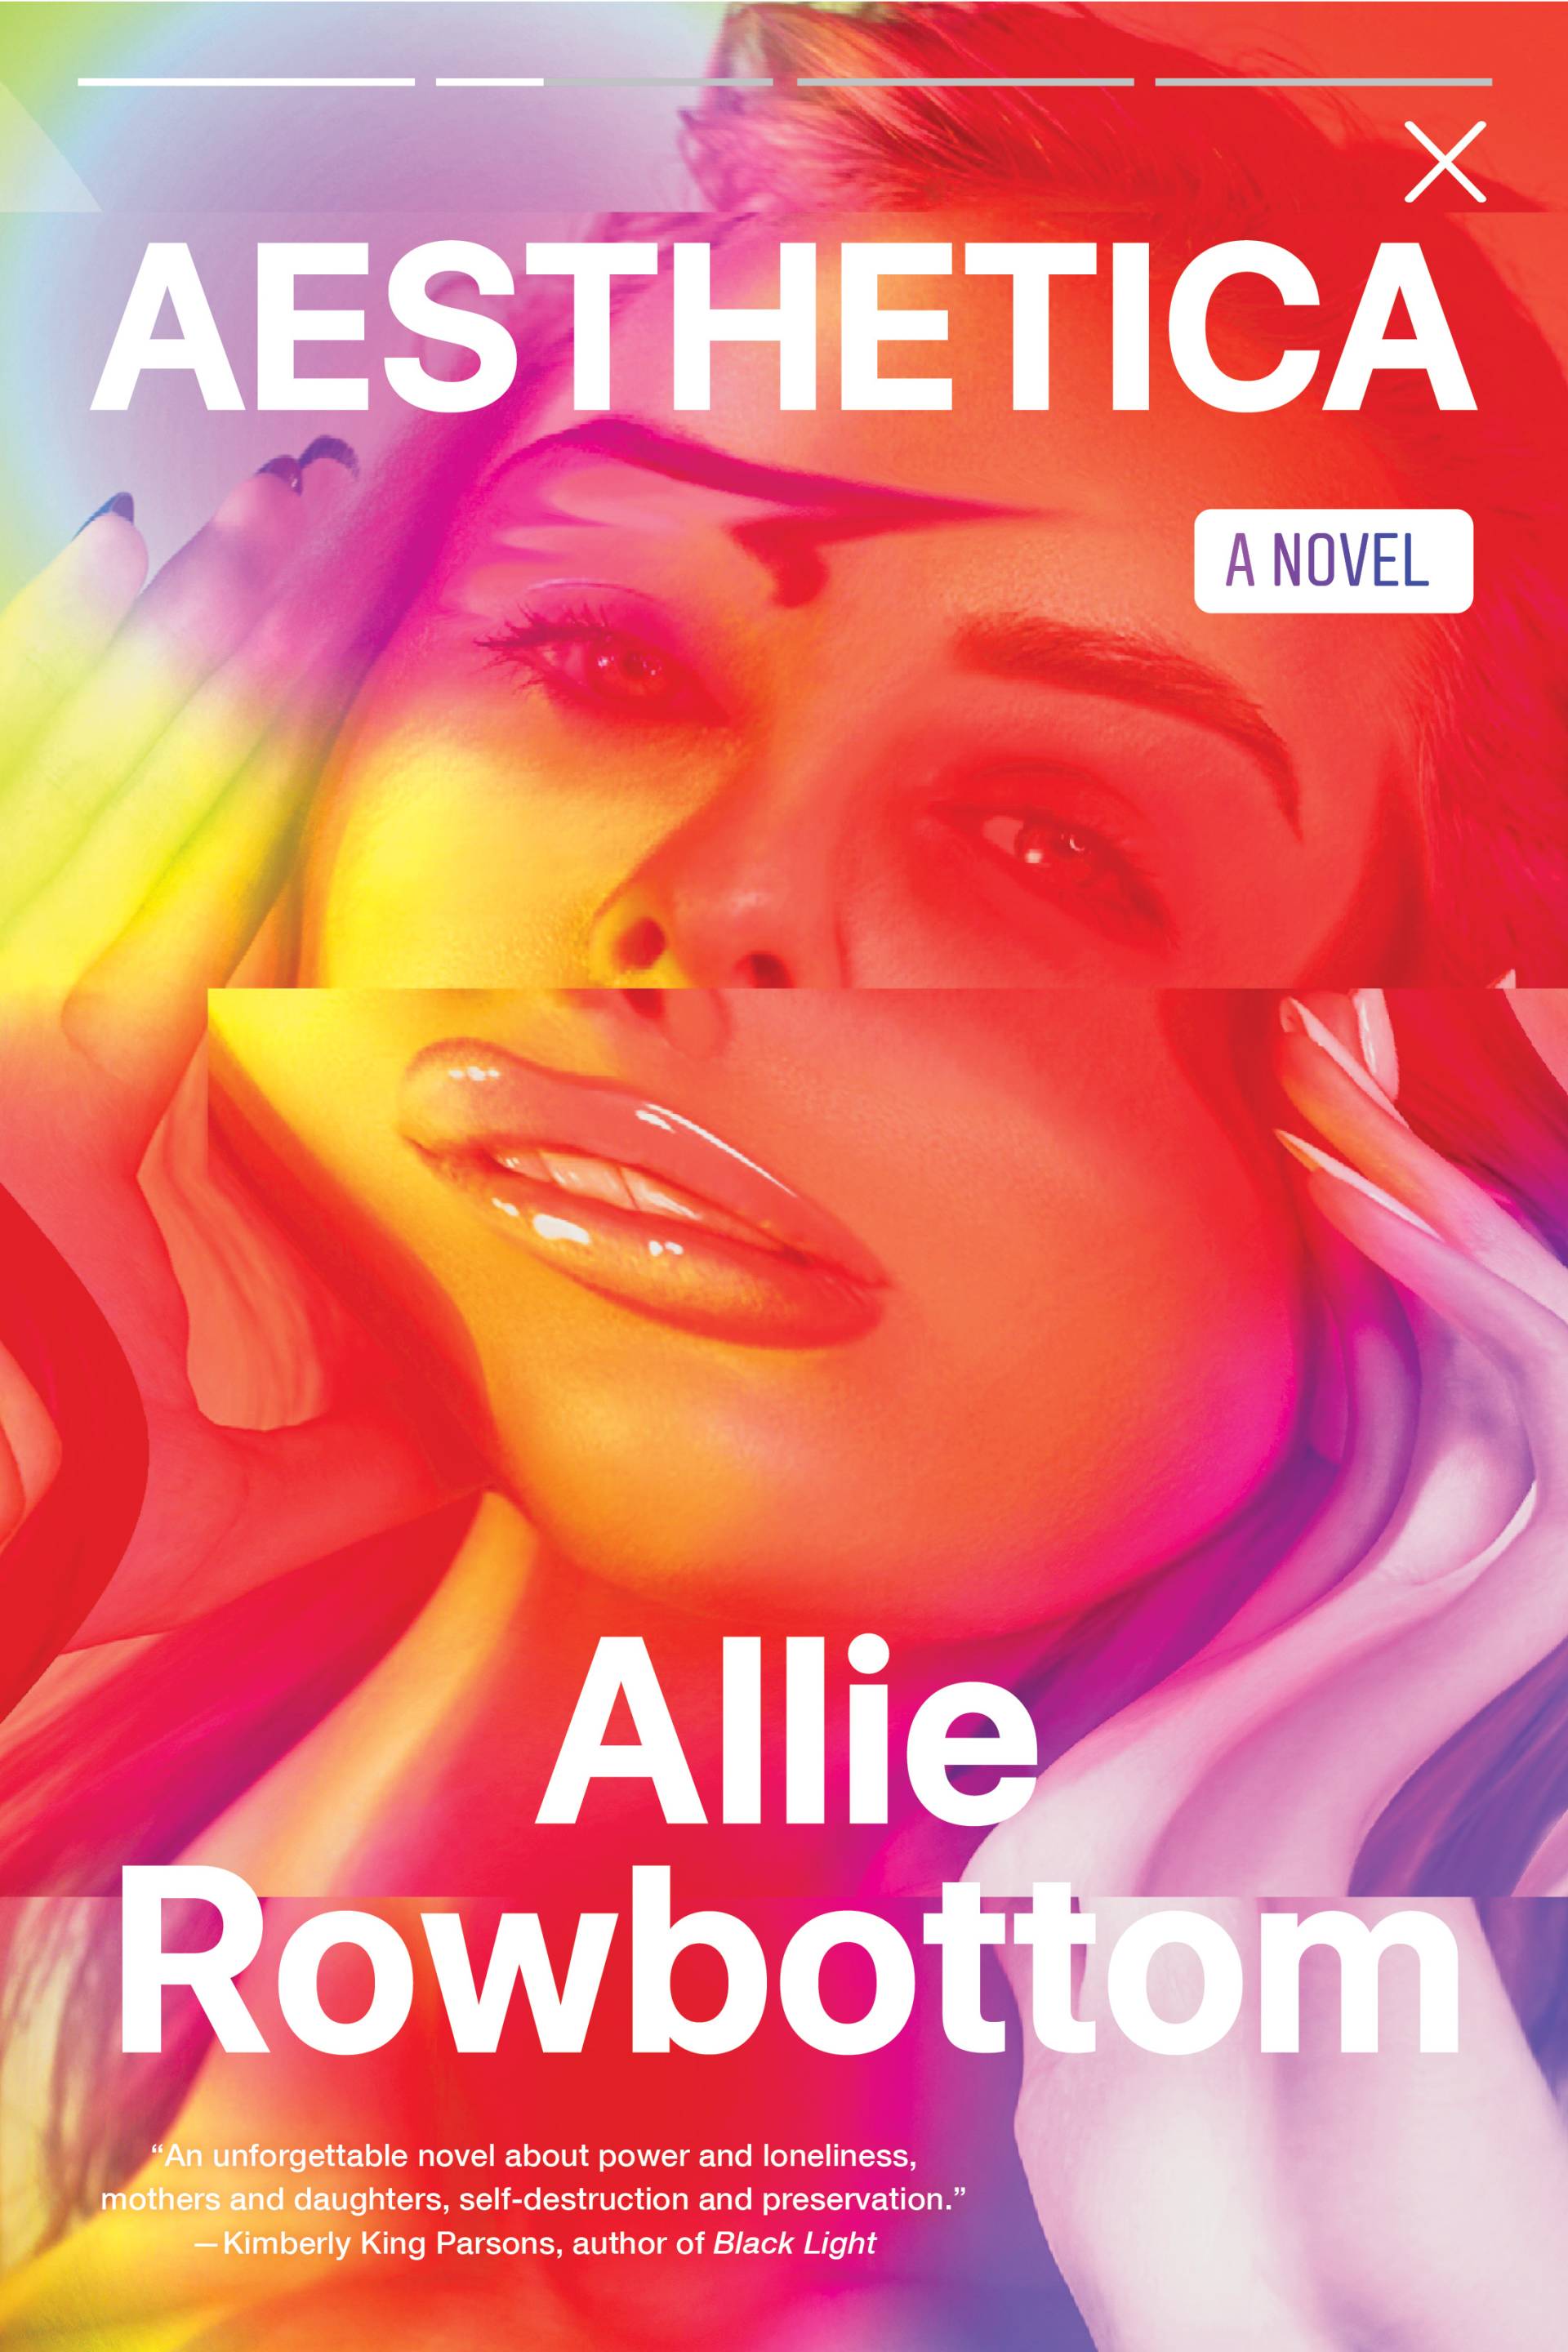 The cover of Allie Rowbottom's 'Aesthetica' shows a distorted, surgically enhanced face.